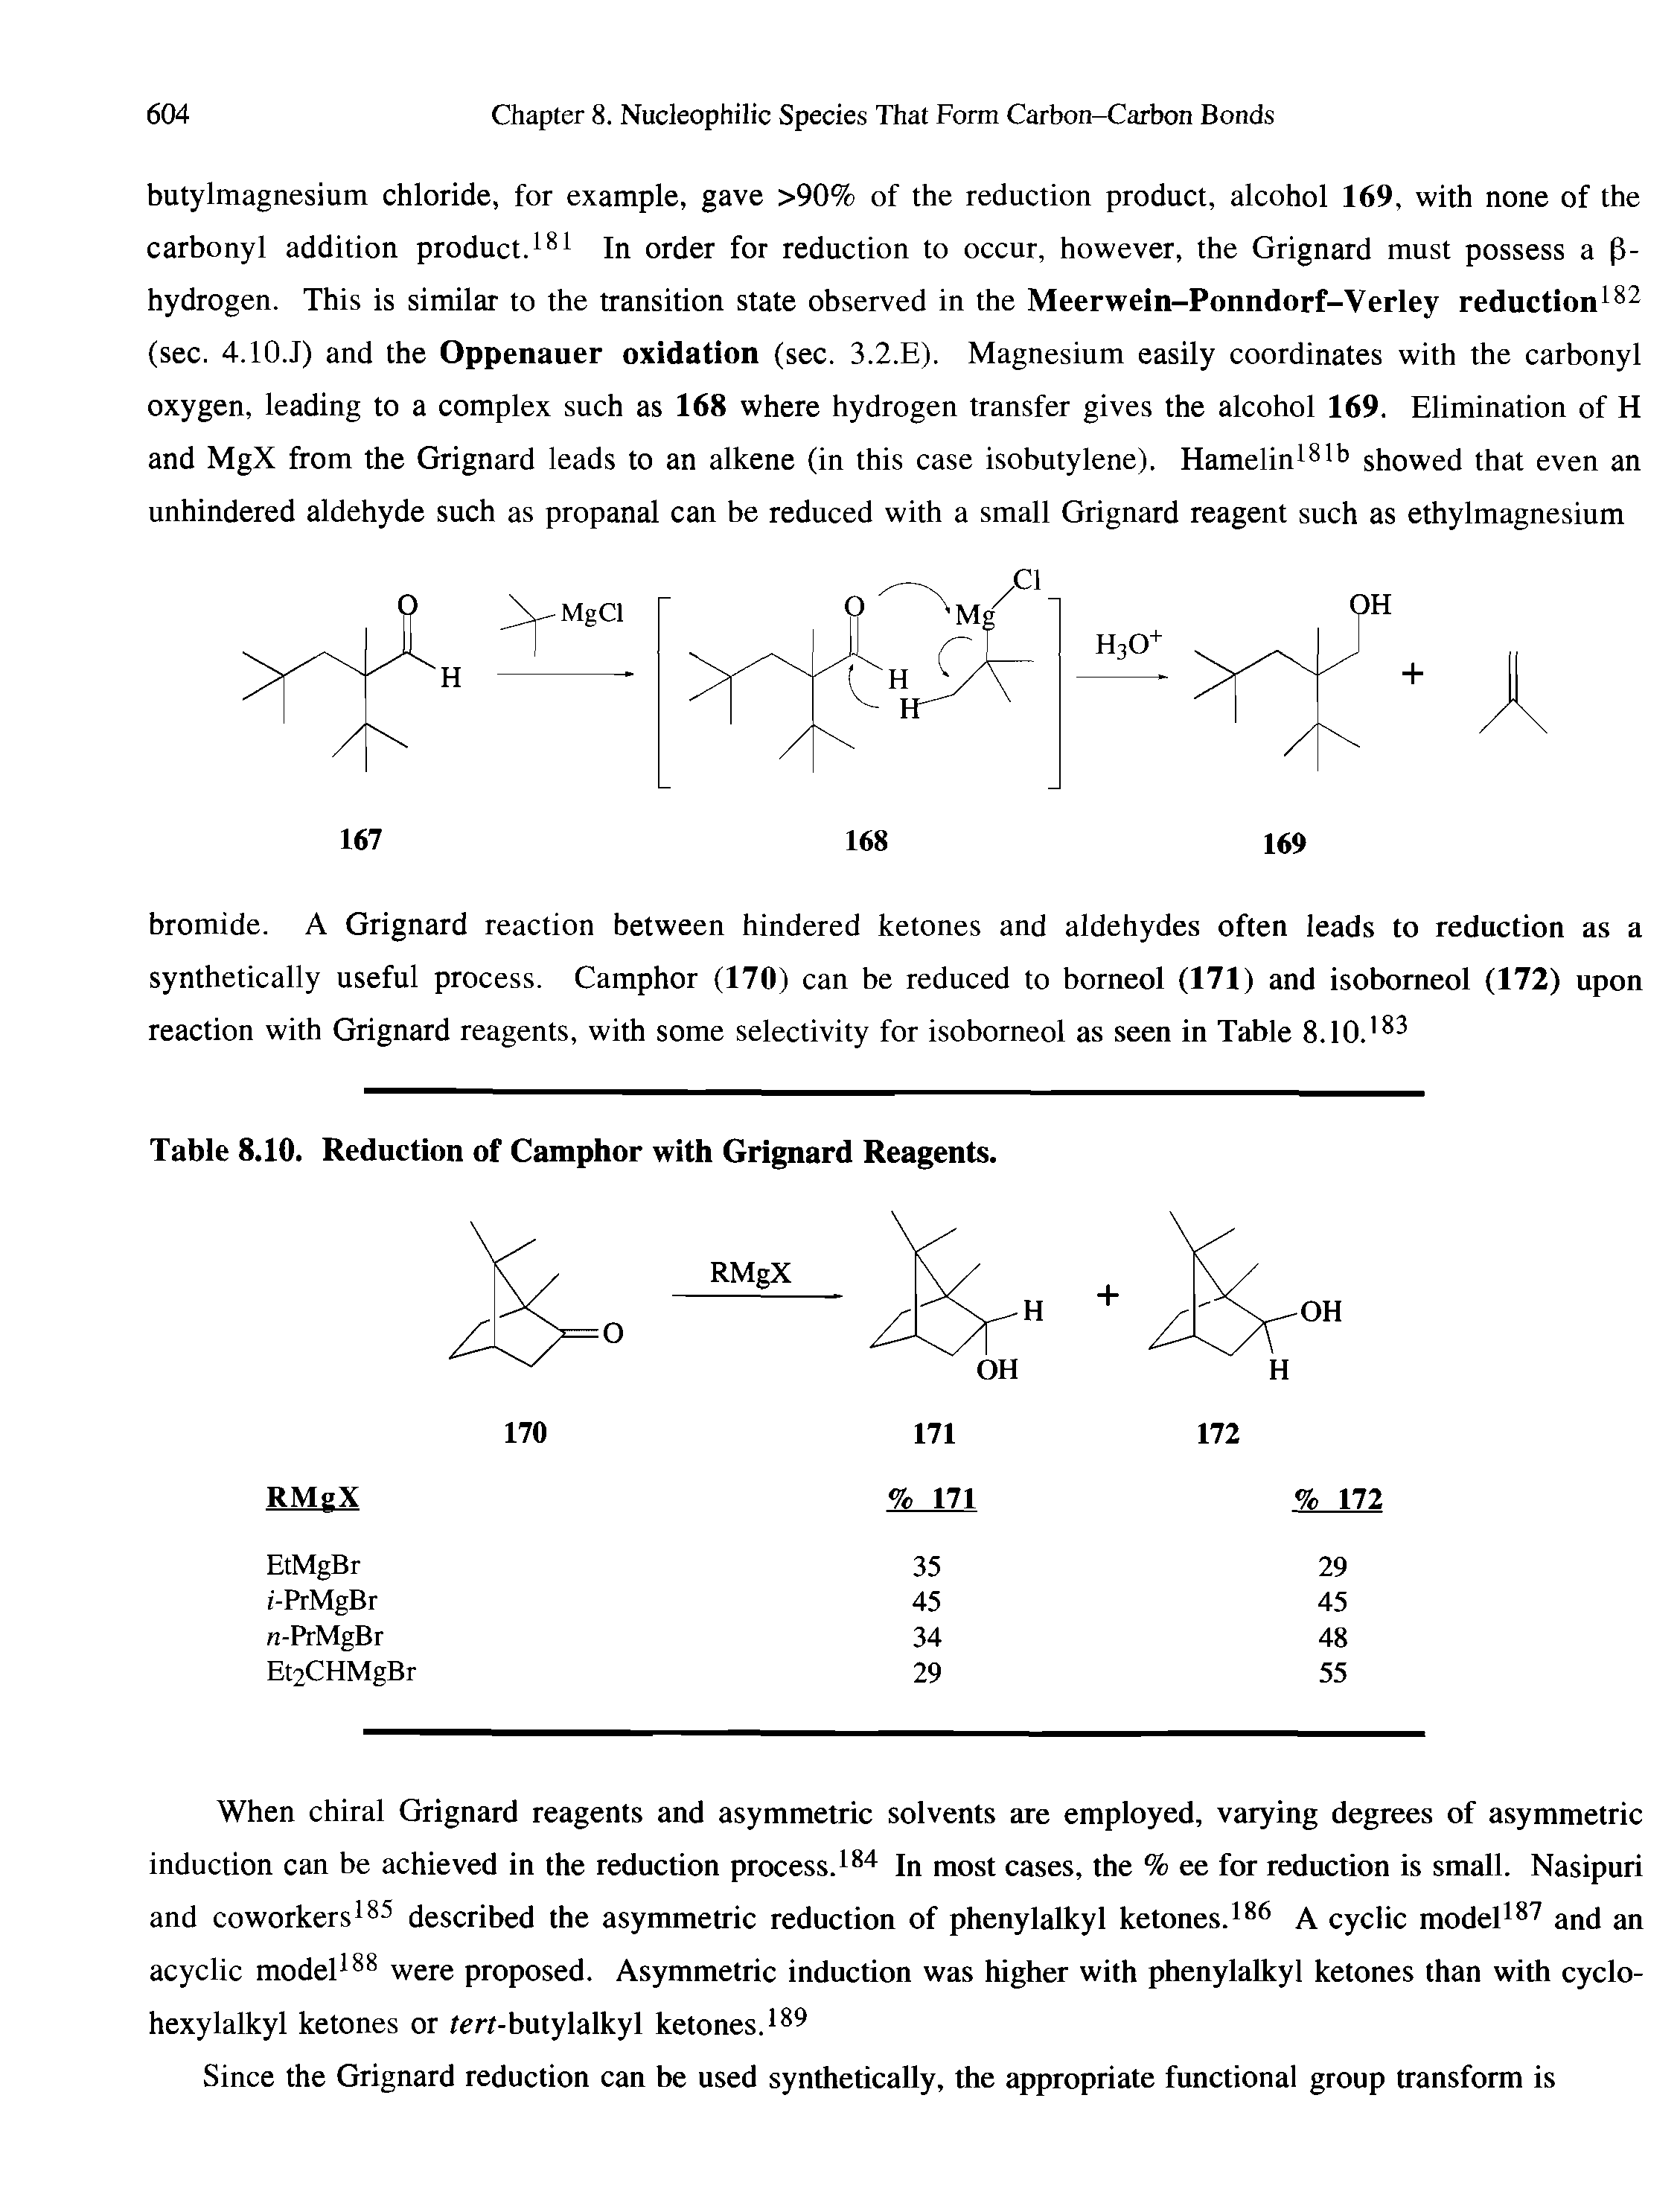 Table 8.10. Reduction of Camphor with Grignard Reagents.